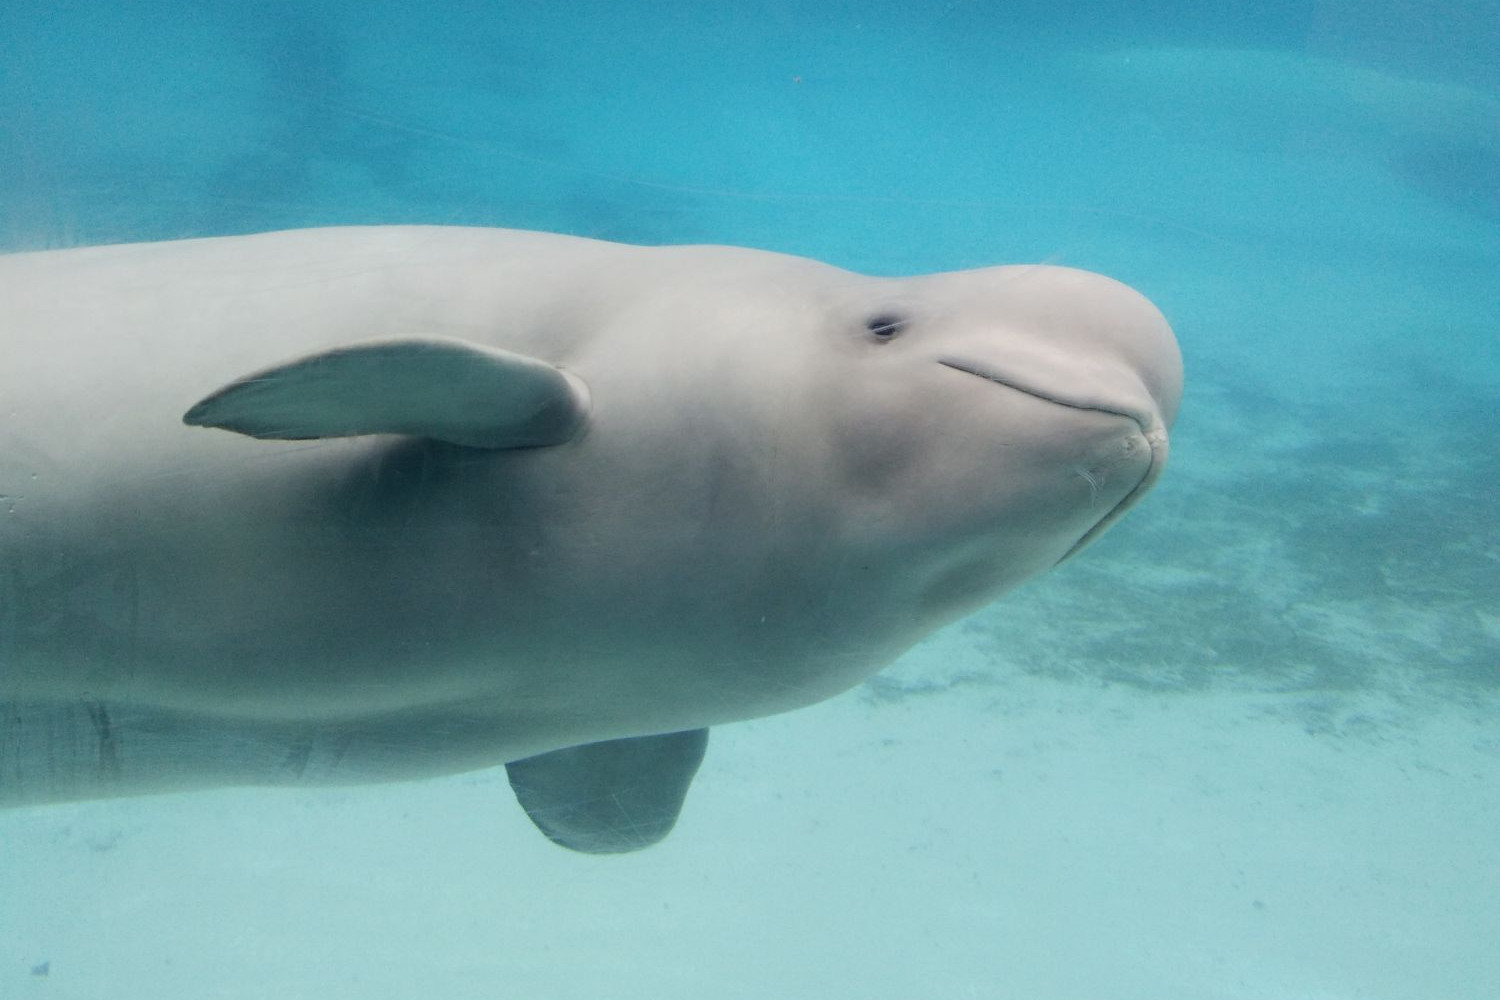 Help stop the exportation of beluga whales